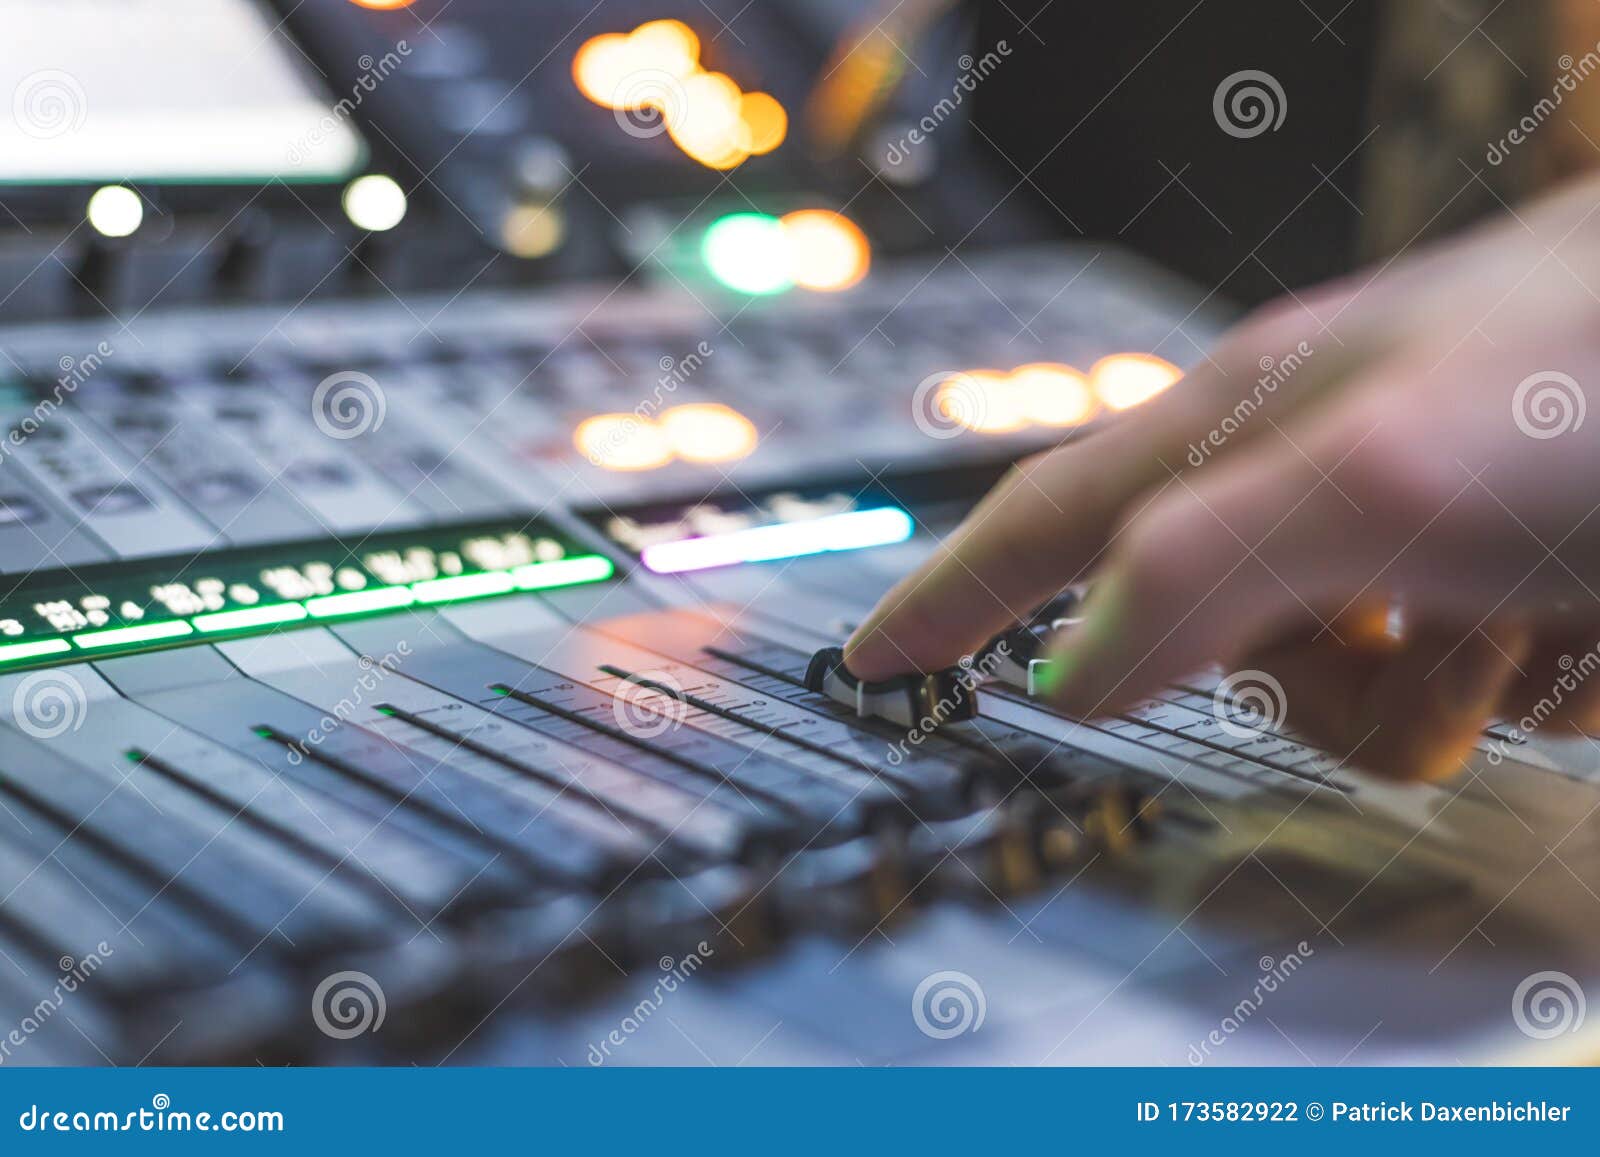 Sound Recording Studio Mixer Desk: Sound Engineer is Operating a ...